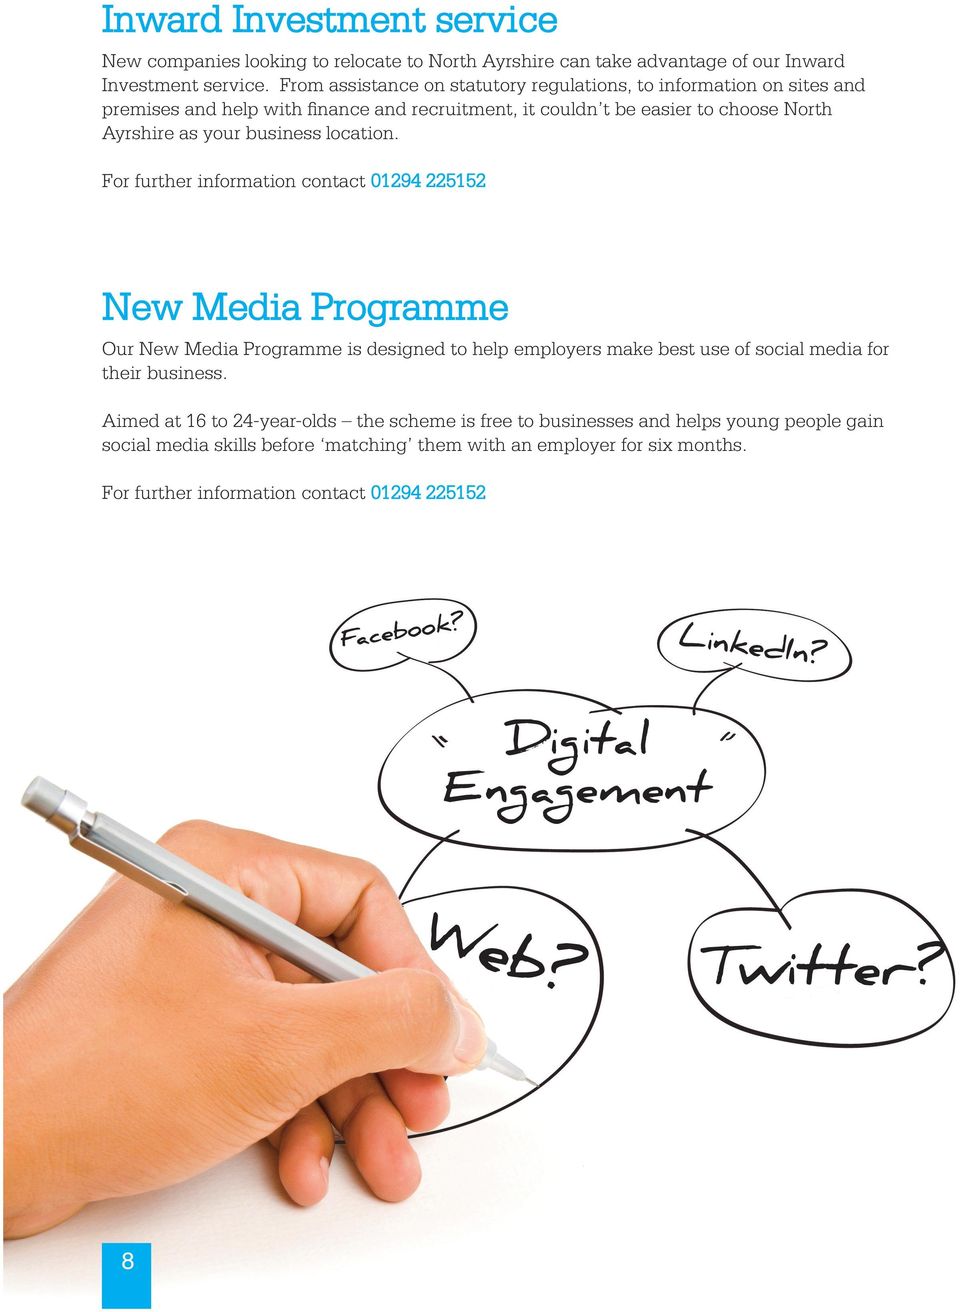 For further information contact 01294 225152 New Media Programme Our New Media Programme is designed to help employers make best use of social media for their business.